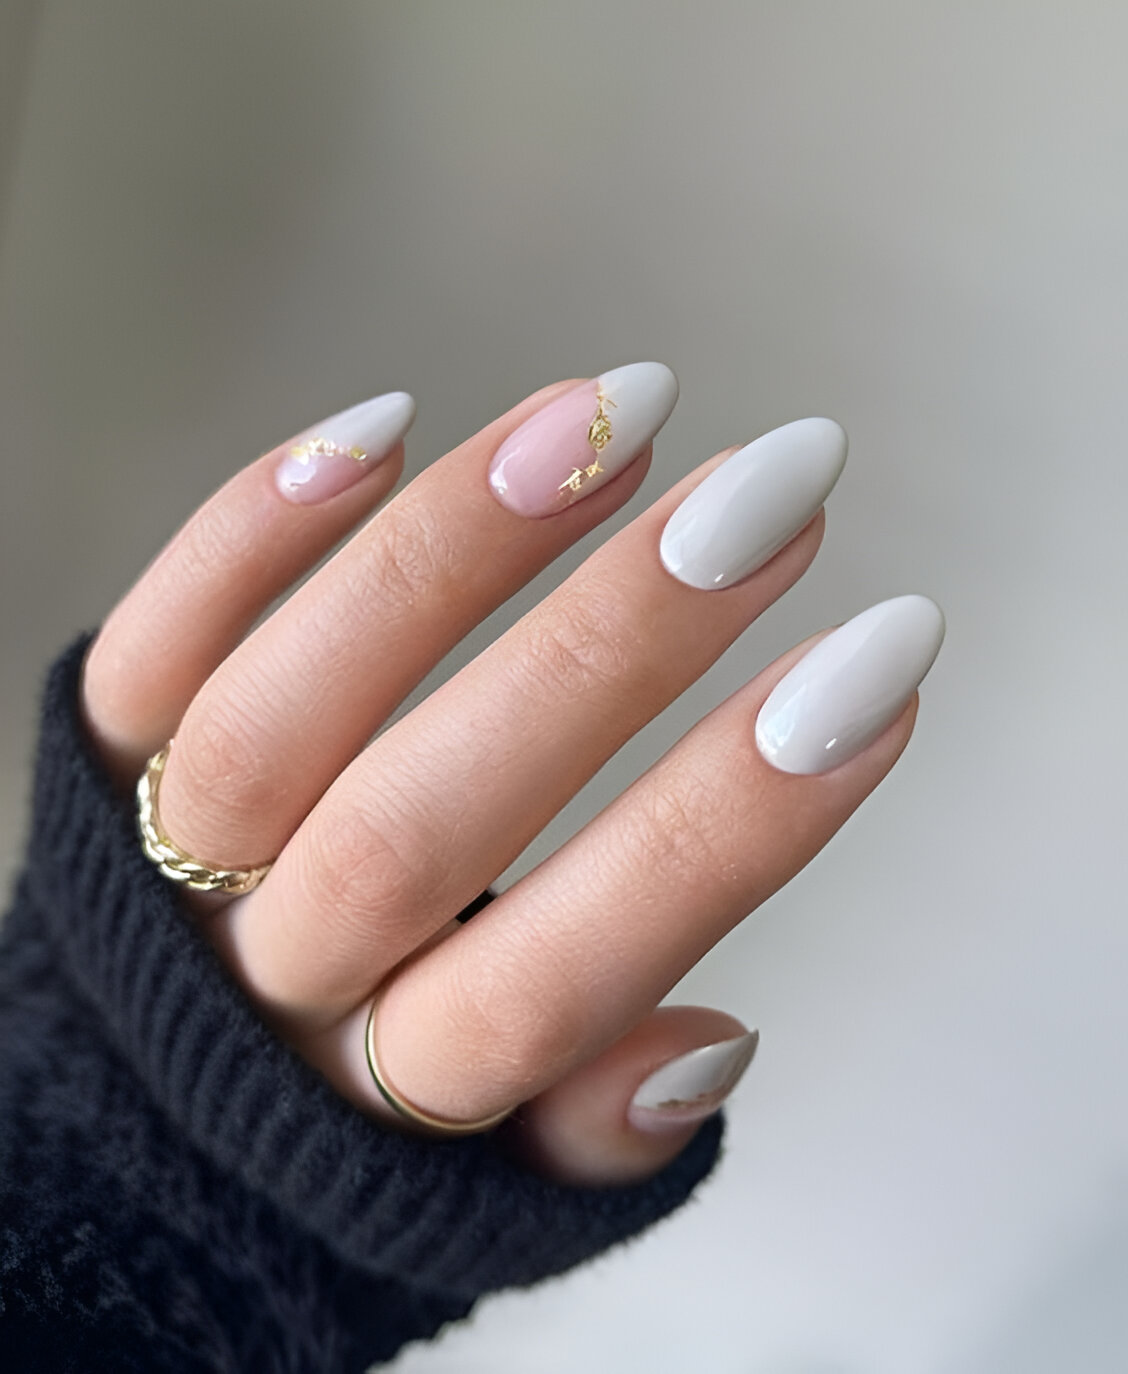 White Almond Manicures 7